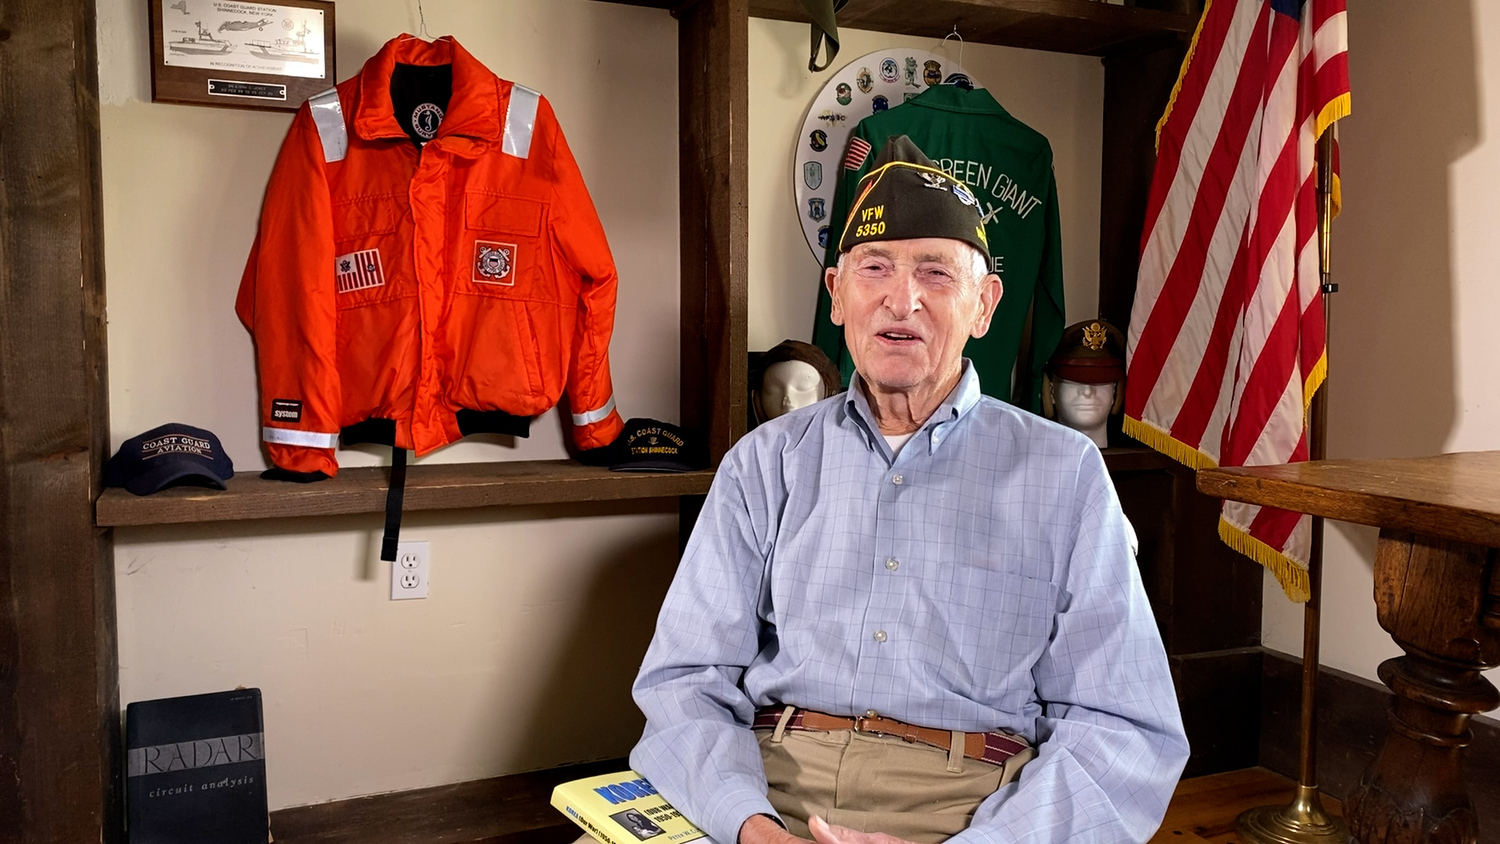 Peter W. Cuthbert during his USA Warrior Stories interview in 2021 at Westhampton Beach VFW Post 5350. COURTESY USA WARRIOR STORIES